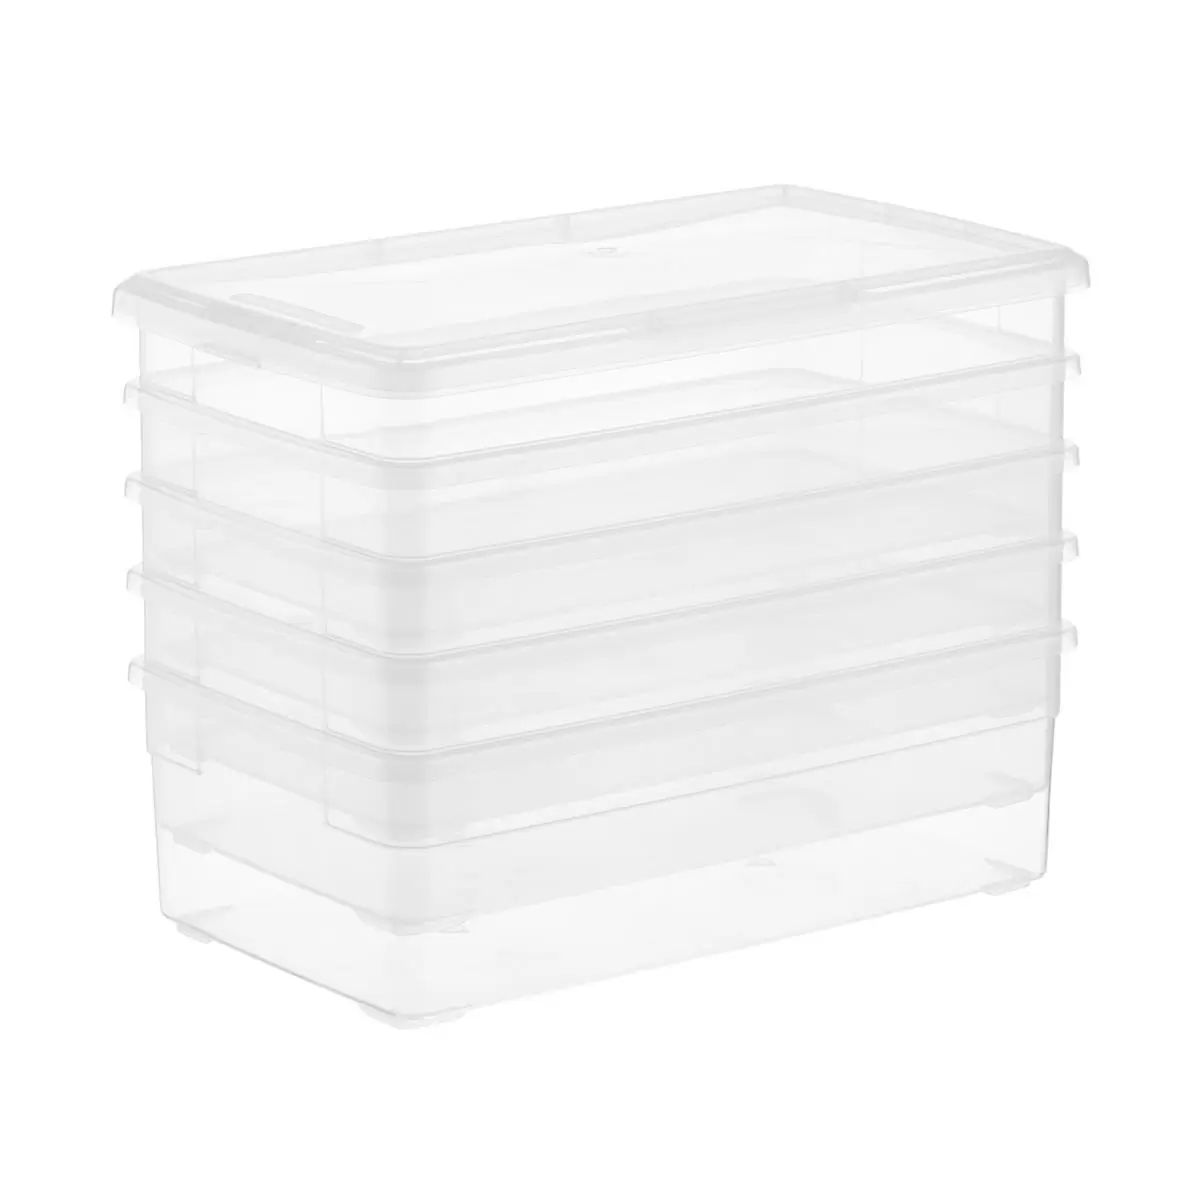 Our Shoe BoxSKU:100087594.82585 Reviews | The Container Store